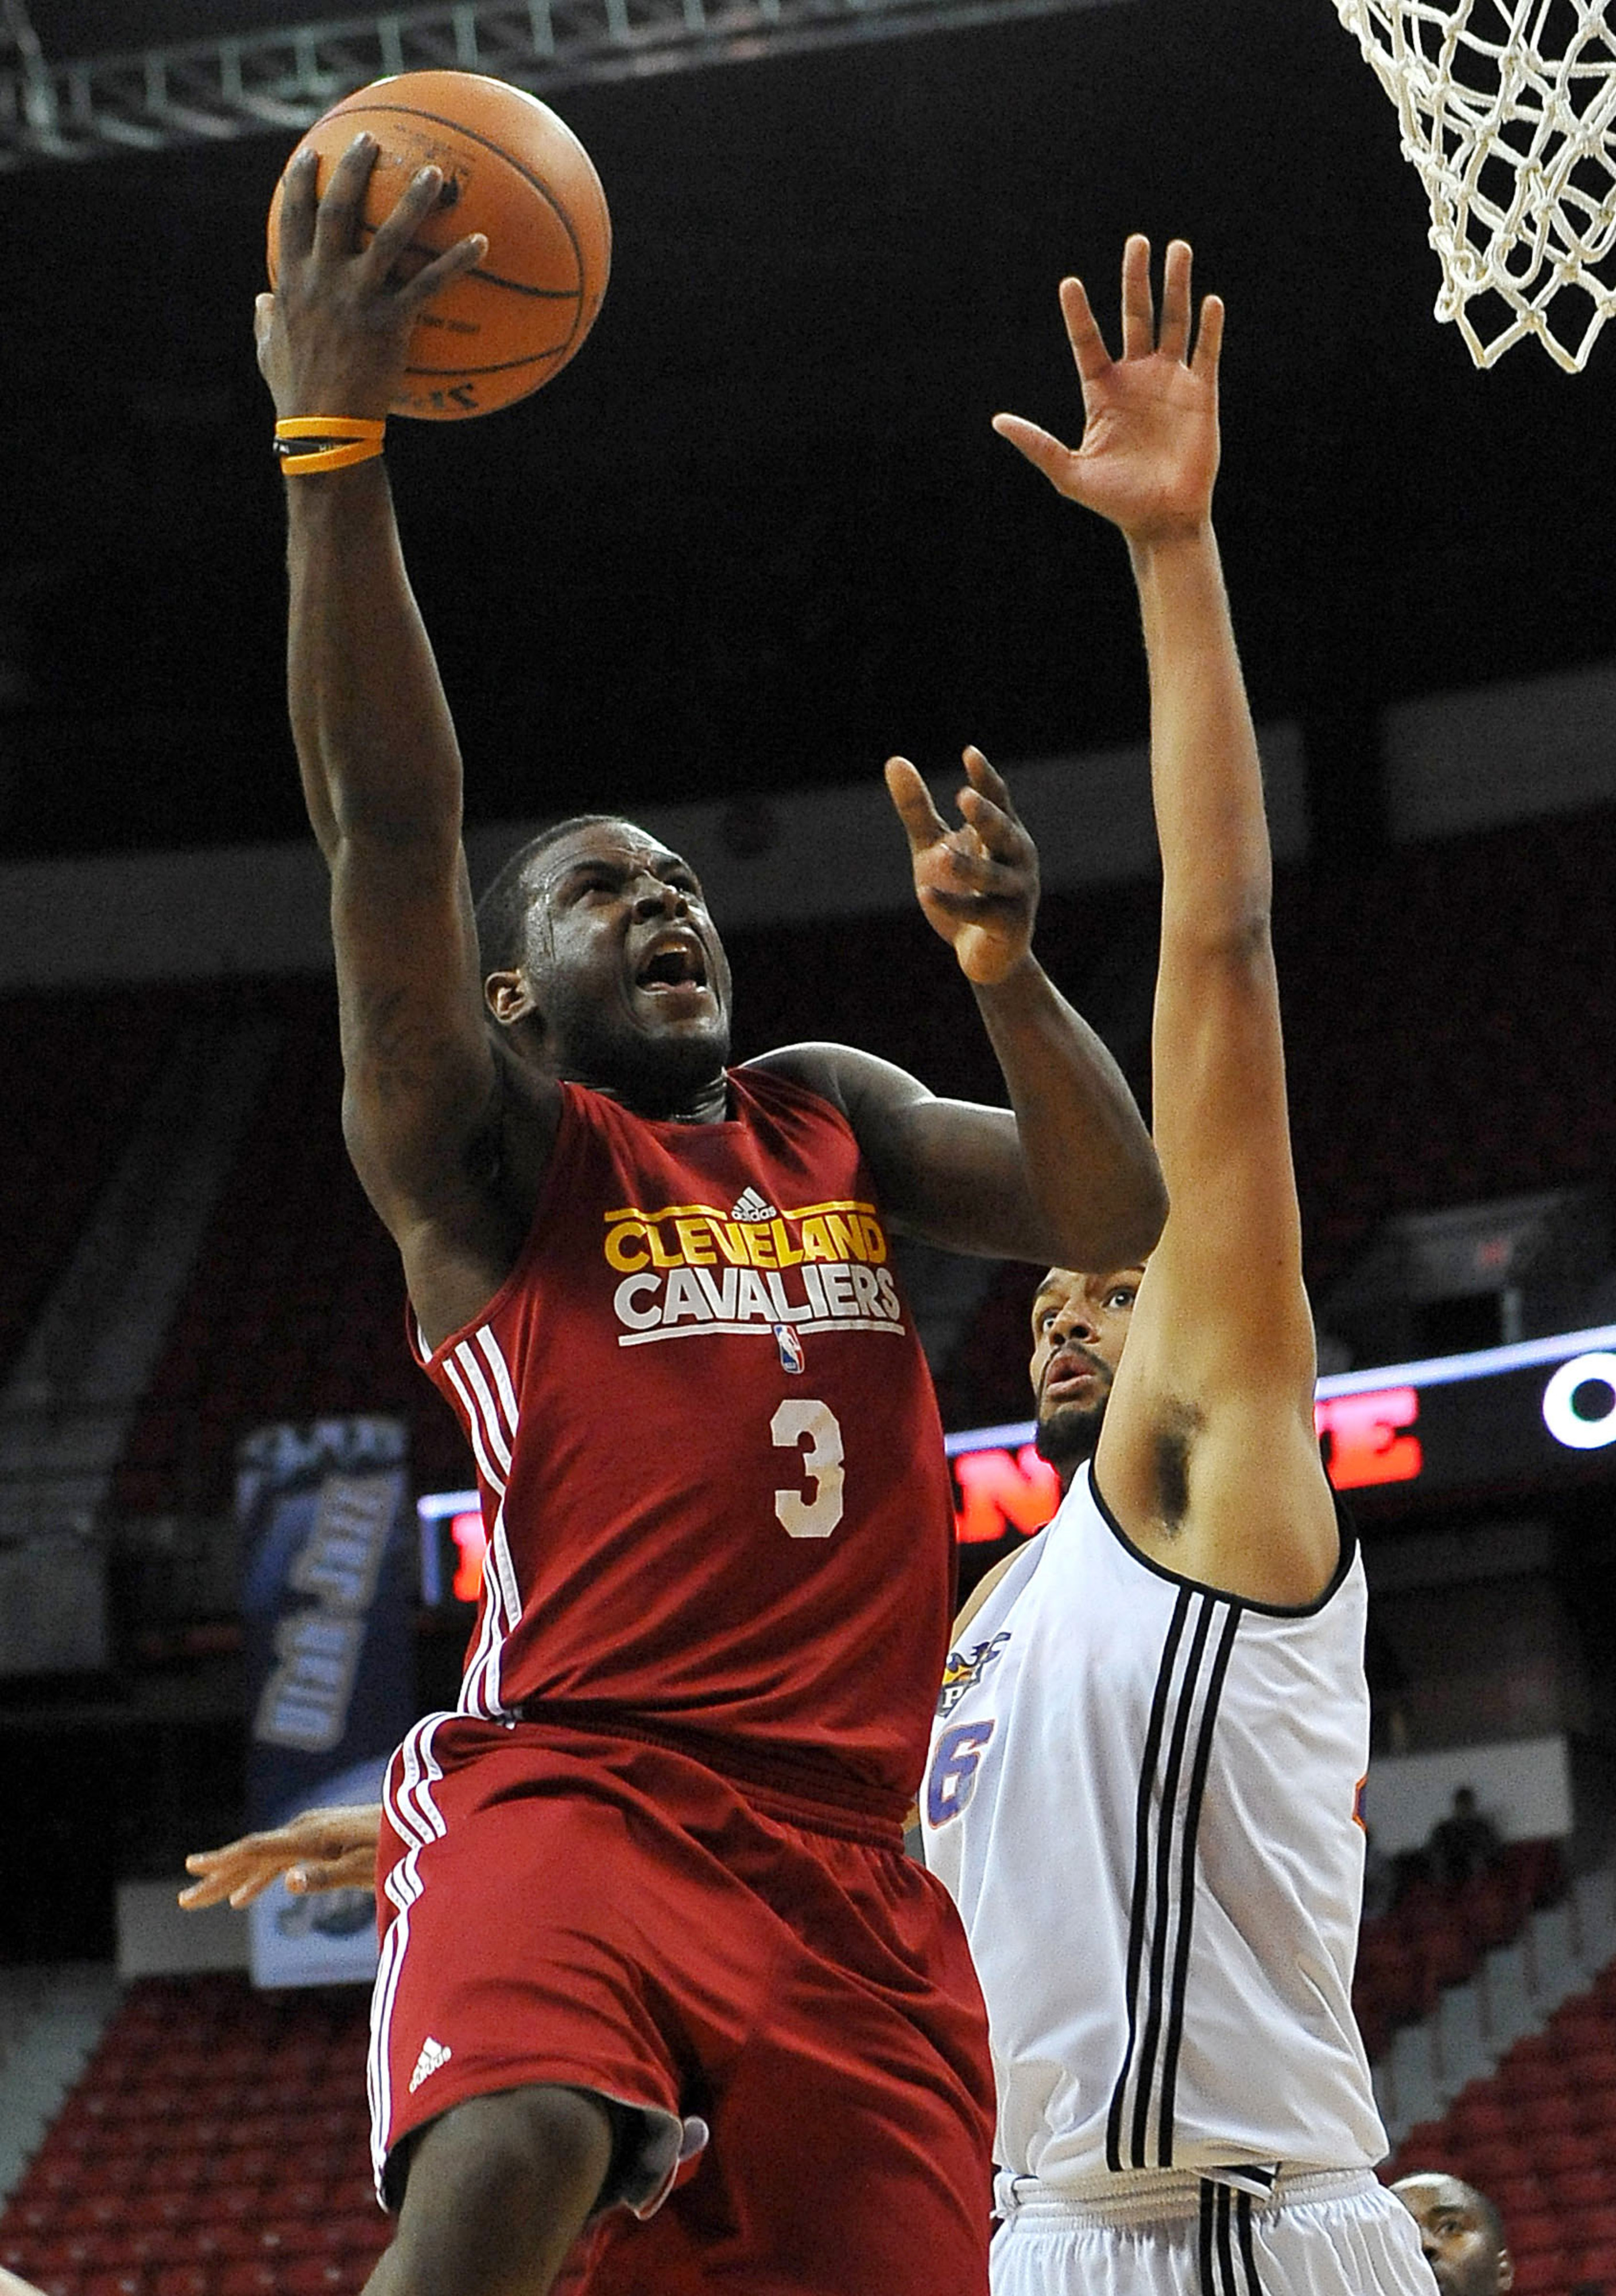 July 17, 2012; Las Vegas, NV, USA;   Cleveland Cavaliers guard Dion Waiters (3) makes a shot over Phoenix Suns center Patrick O'Bryant (26) during the game at the Thomas and Mack Center. Mandatory Credit: Jayne Kamin-Oncea-US PRESSWIRE